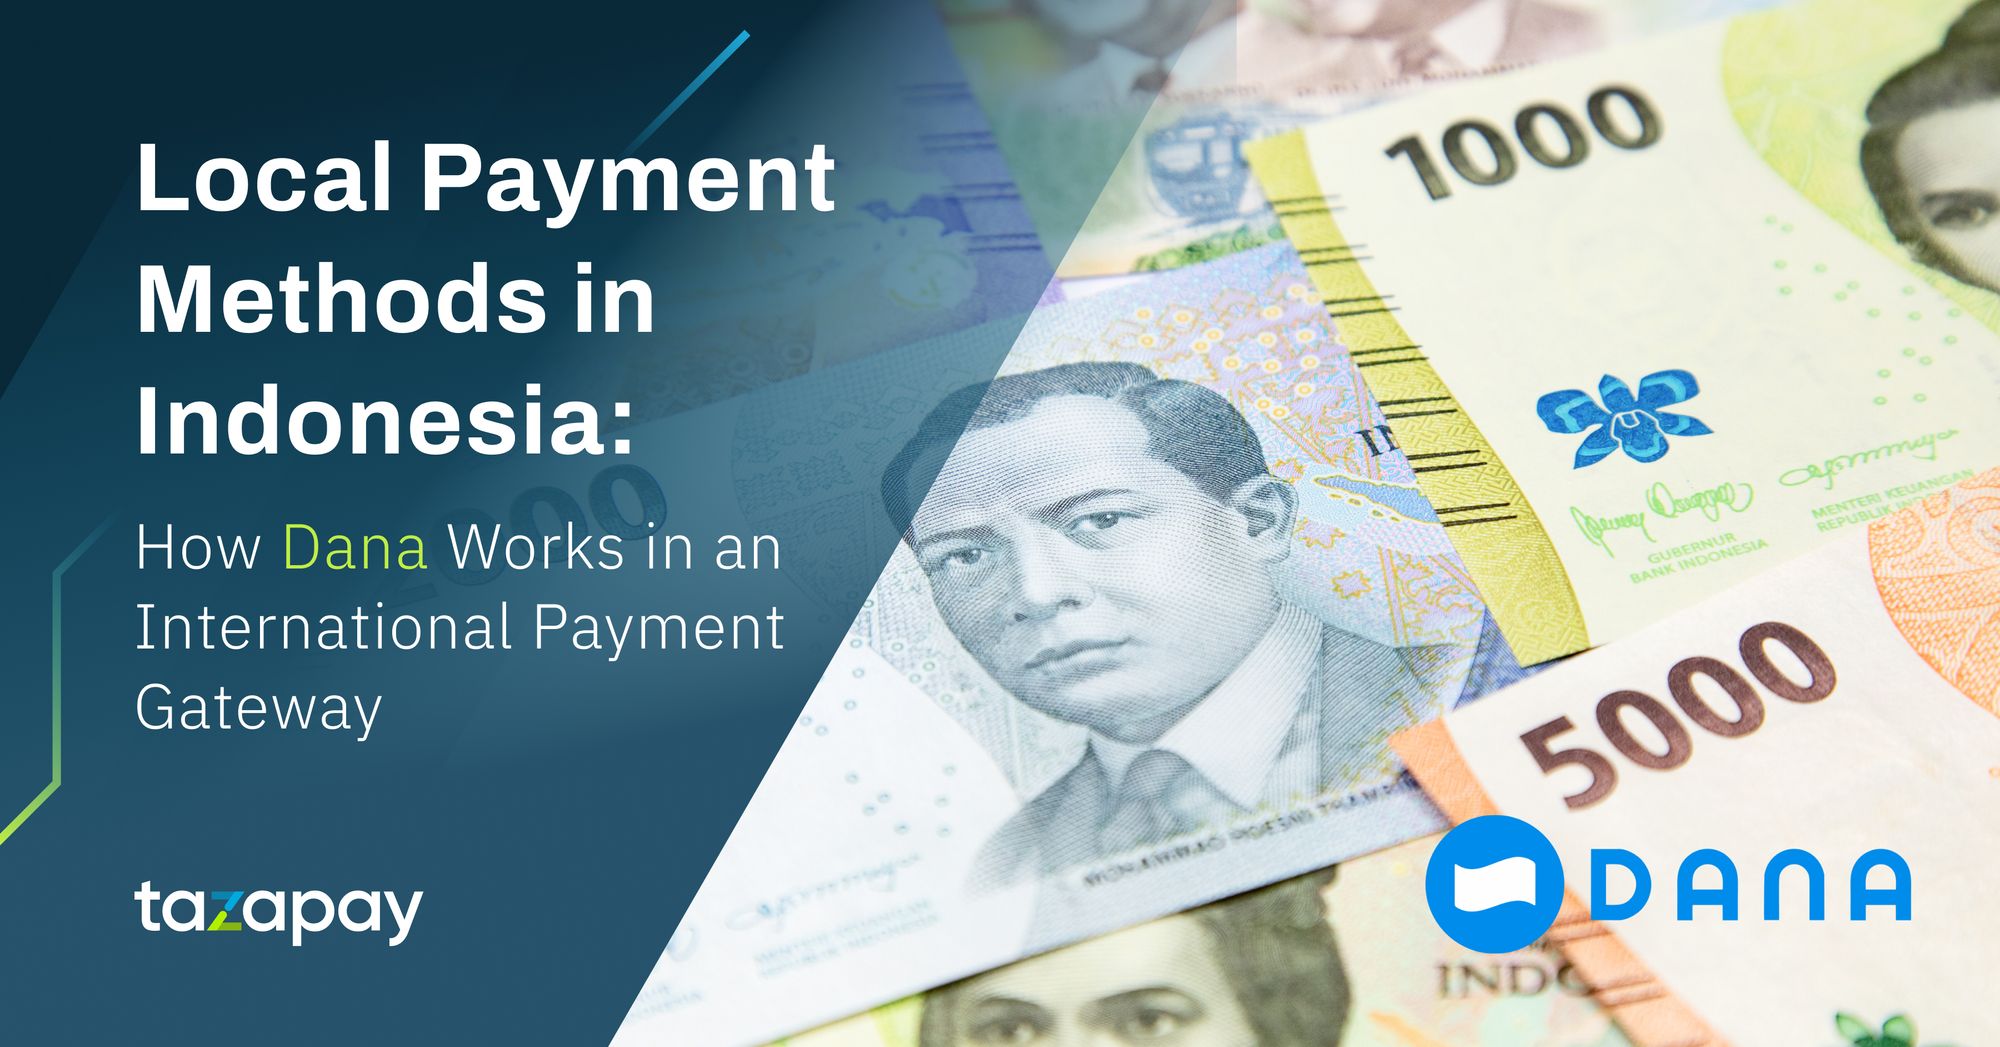 Local Payment Methods in Indonesia: How Dana Works in an International Payment Gateway